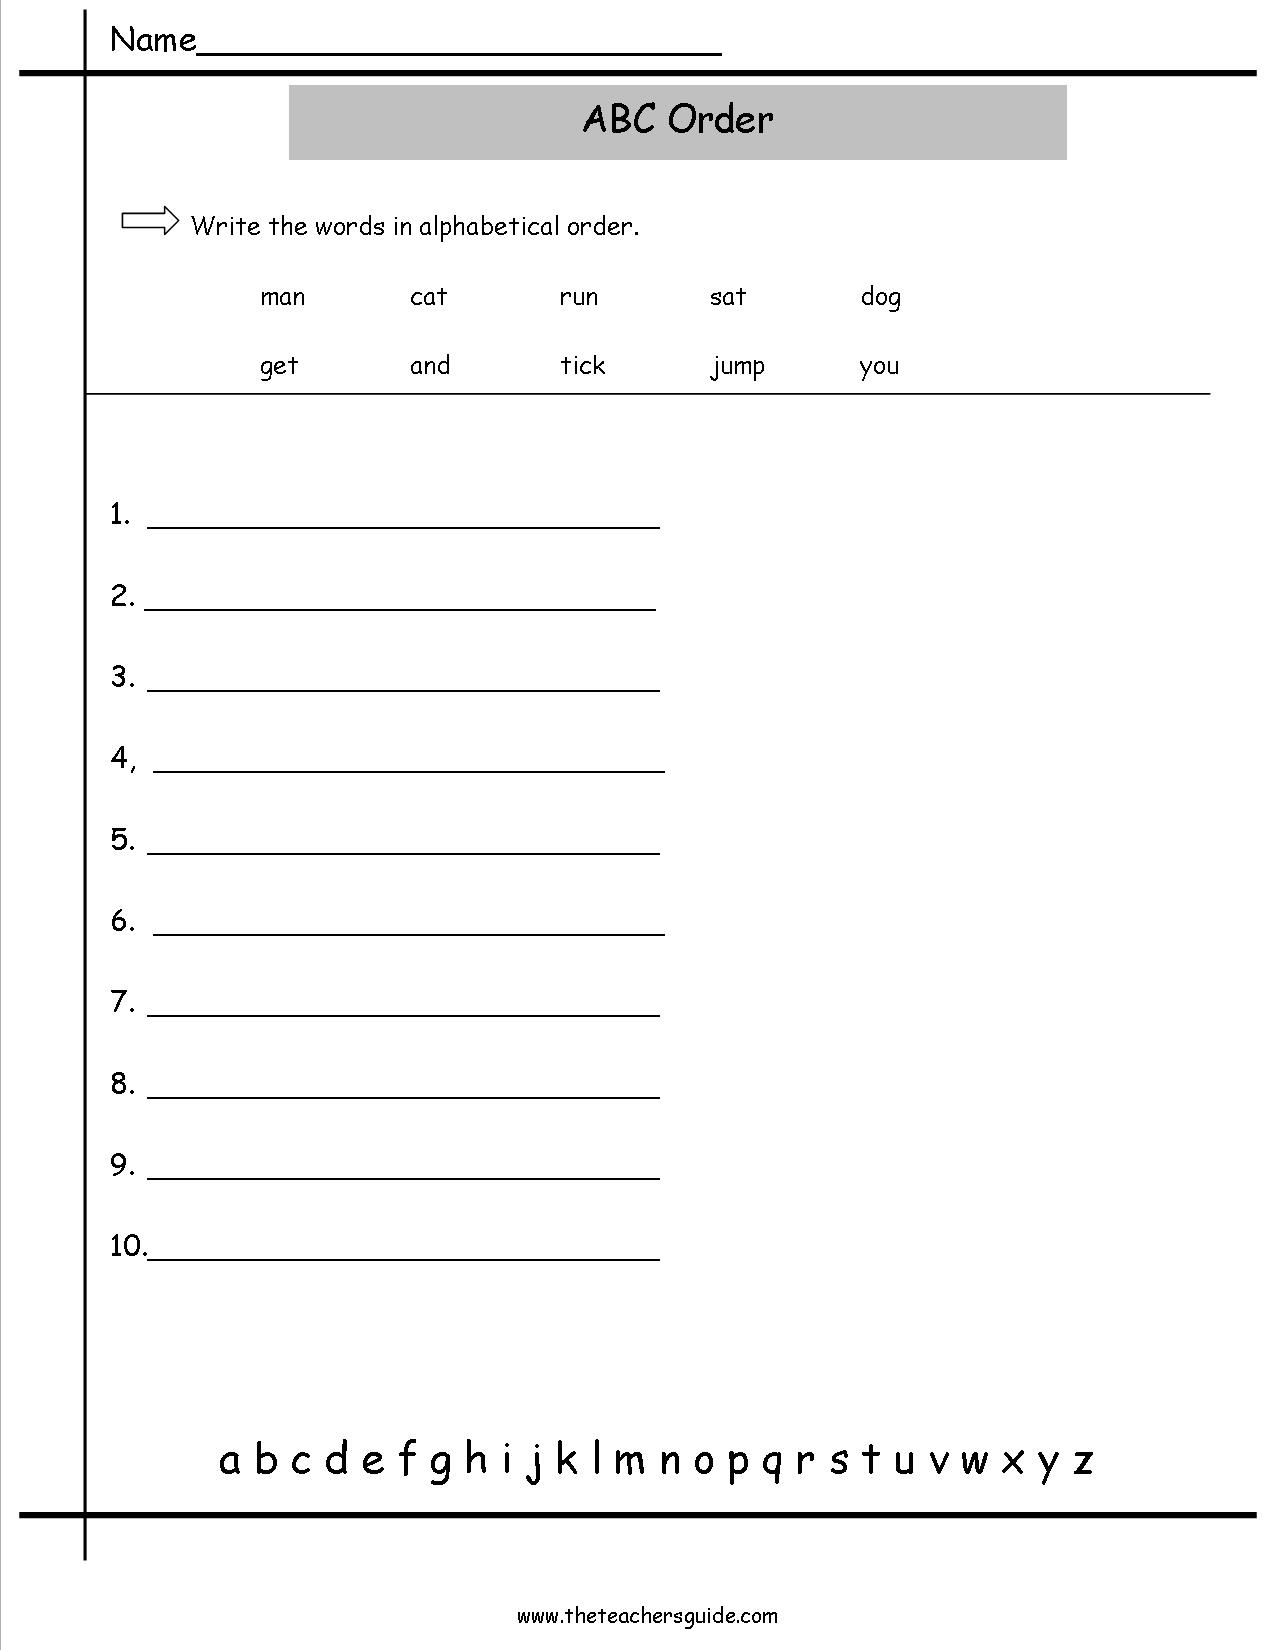 Abc Order Worksheets From The Teacher&amp;#039;s Guide | Printable Abc Order Worksheets